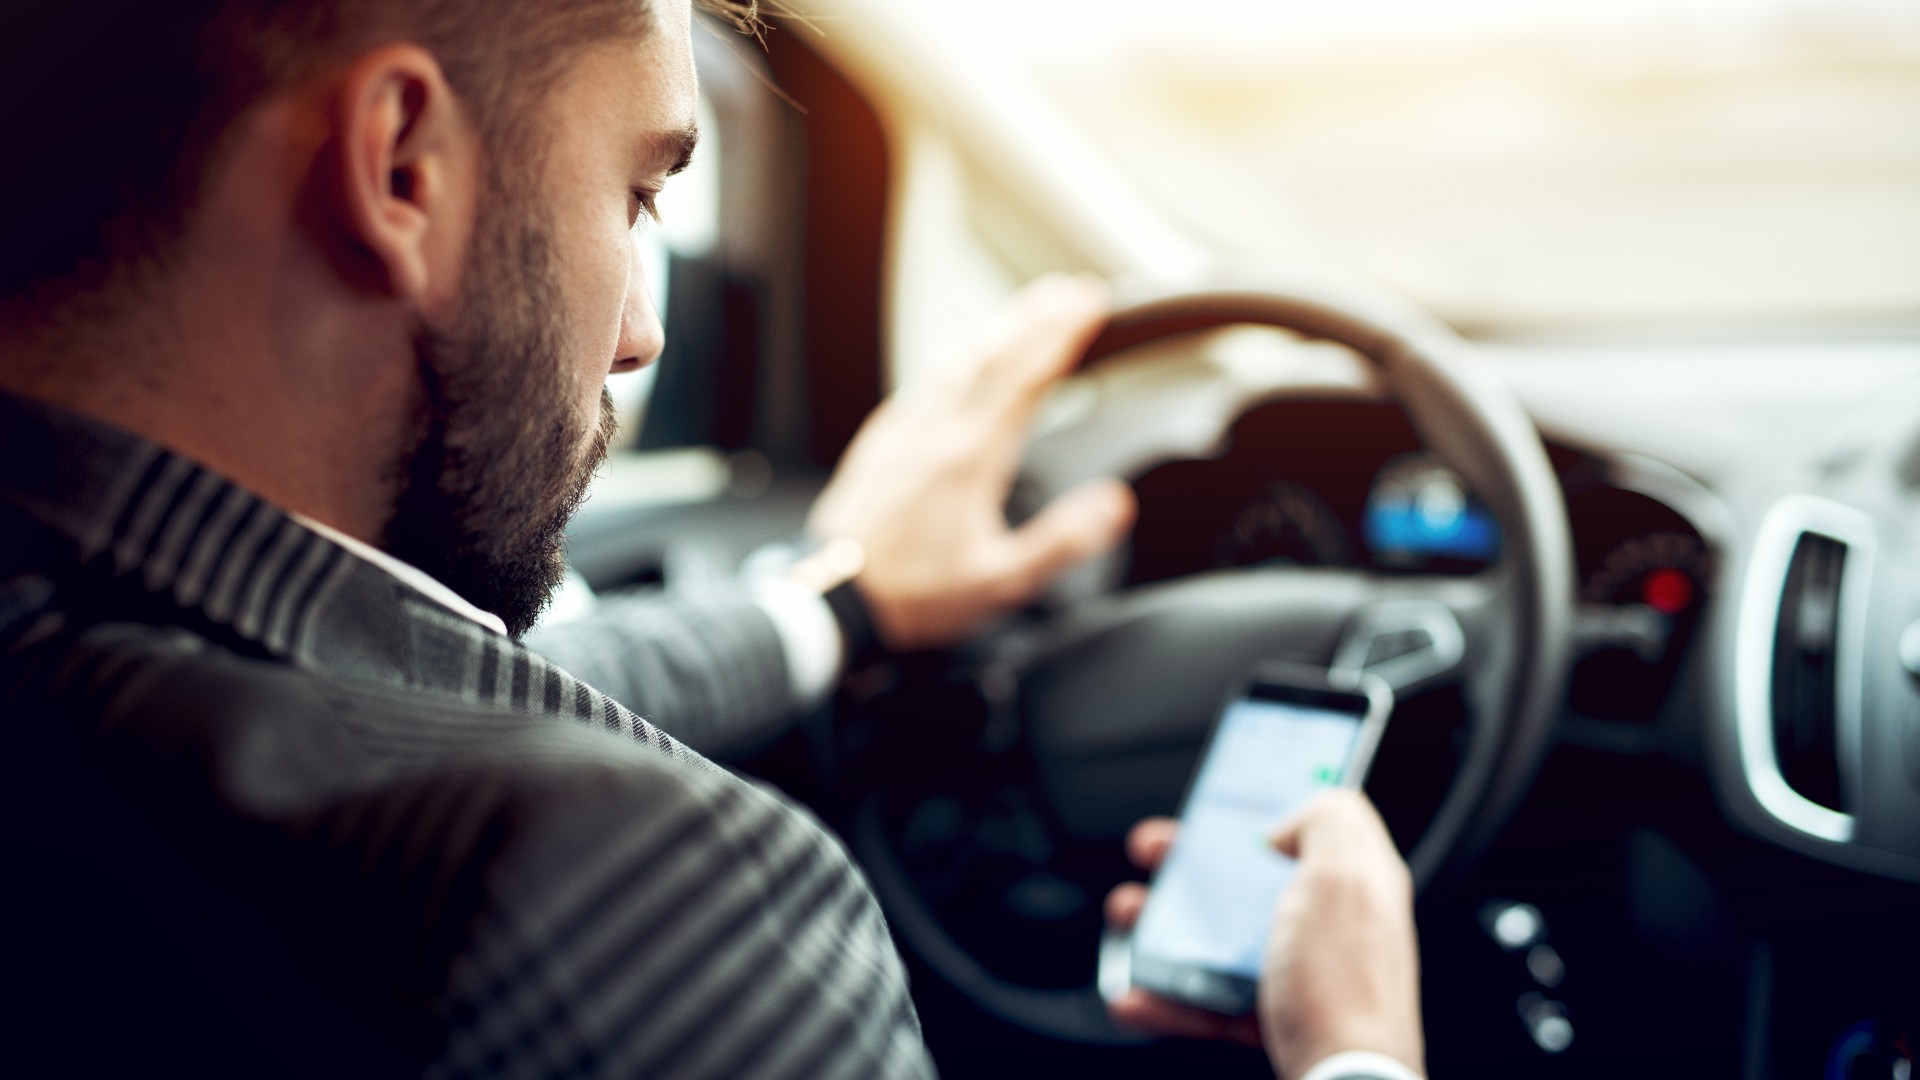 Calls for increased penalties for using phone while driving